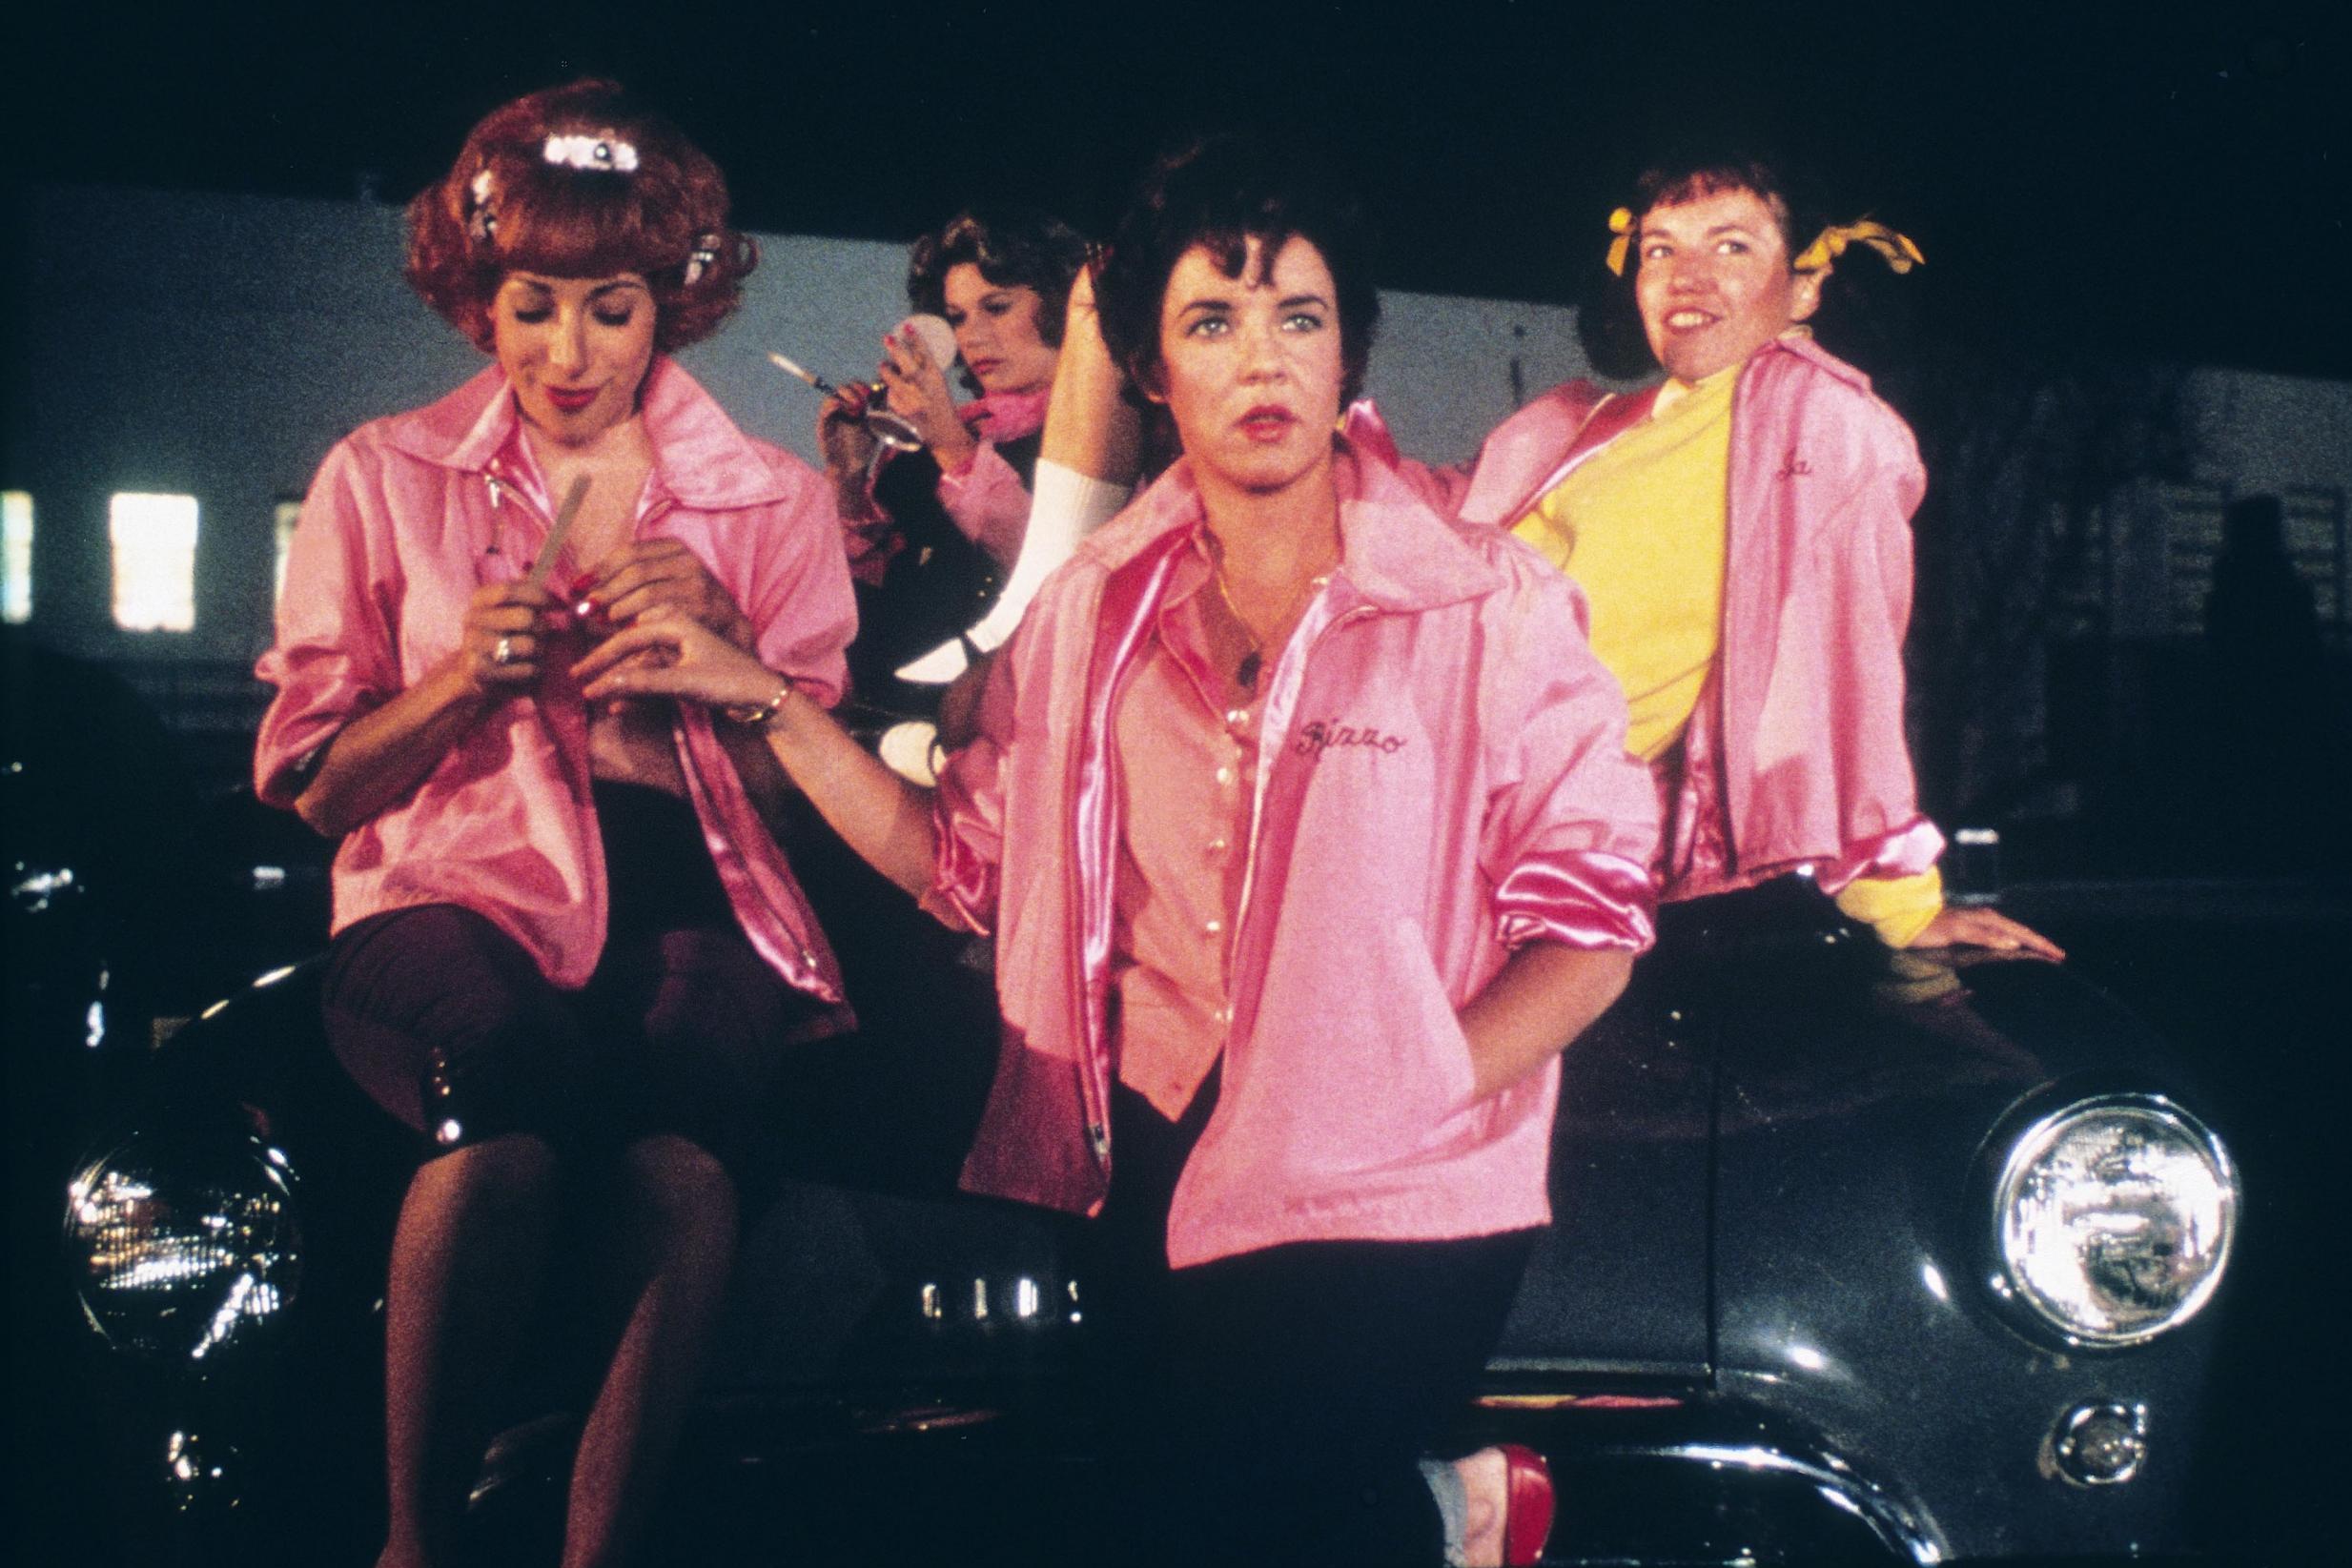 The outfits in the film are iconic, especially the Pink Ladies jackets